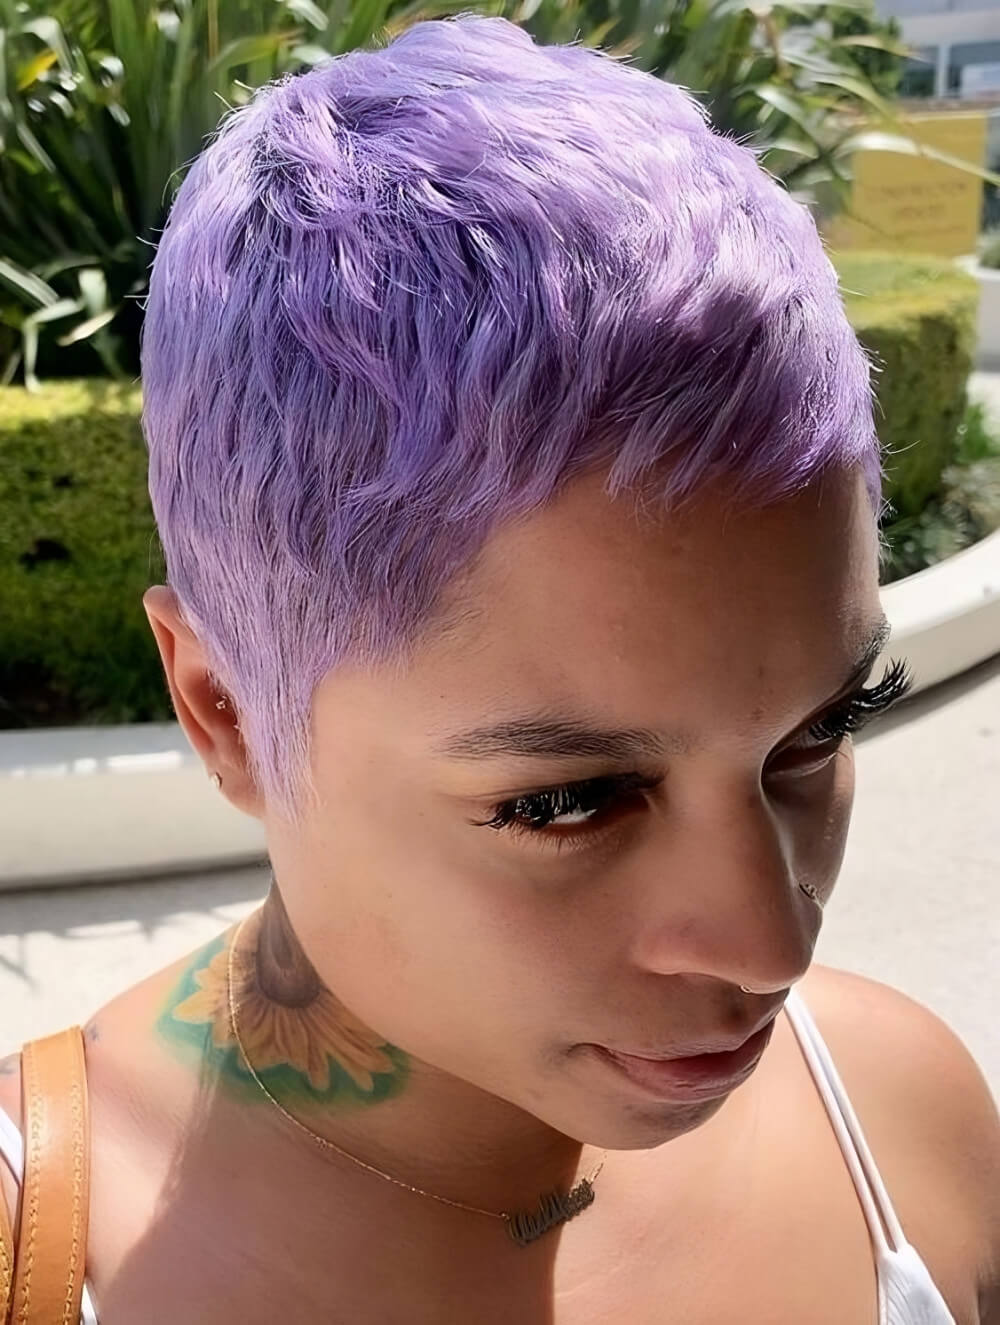 25 Lavender Hair Ideas Every Pretty Girl Should Check Out - 165